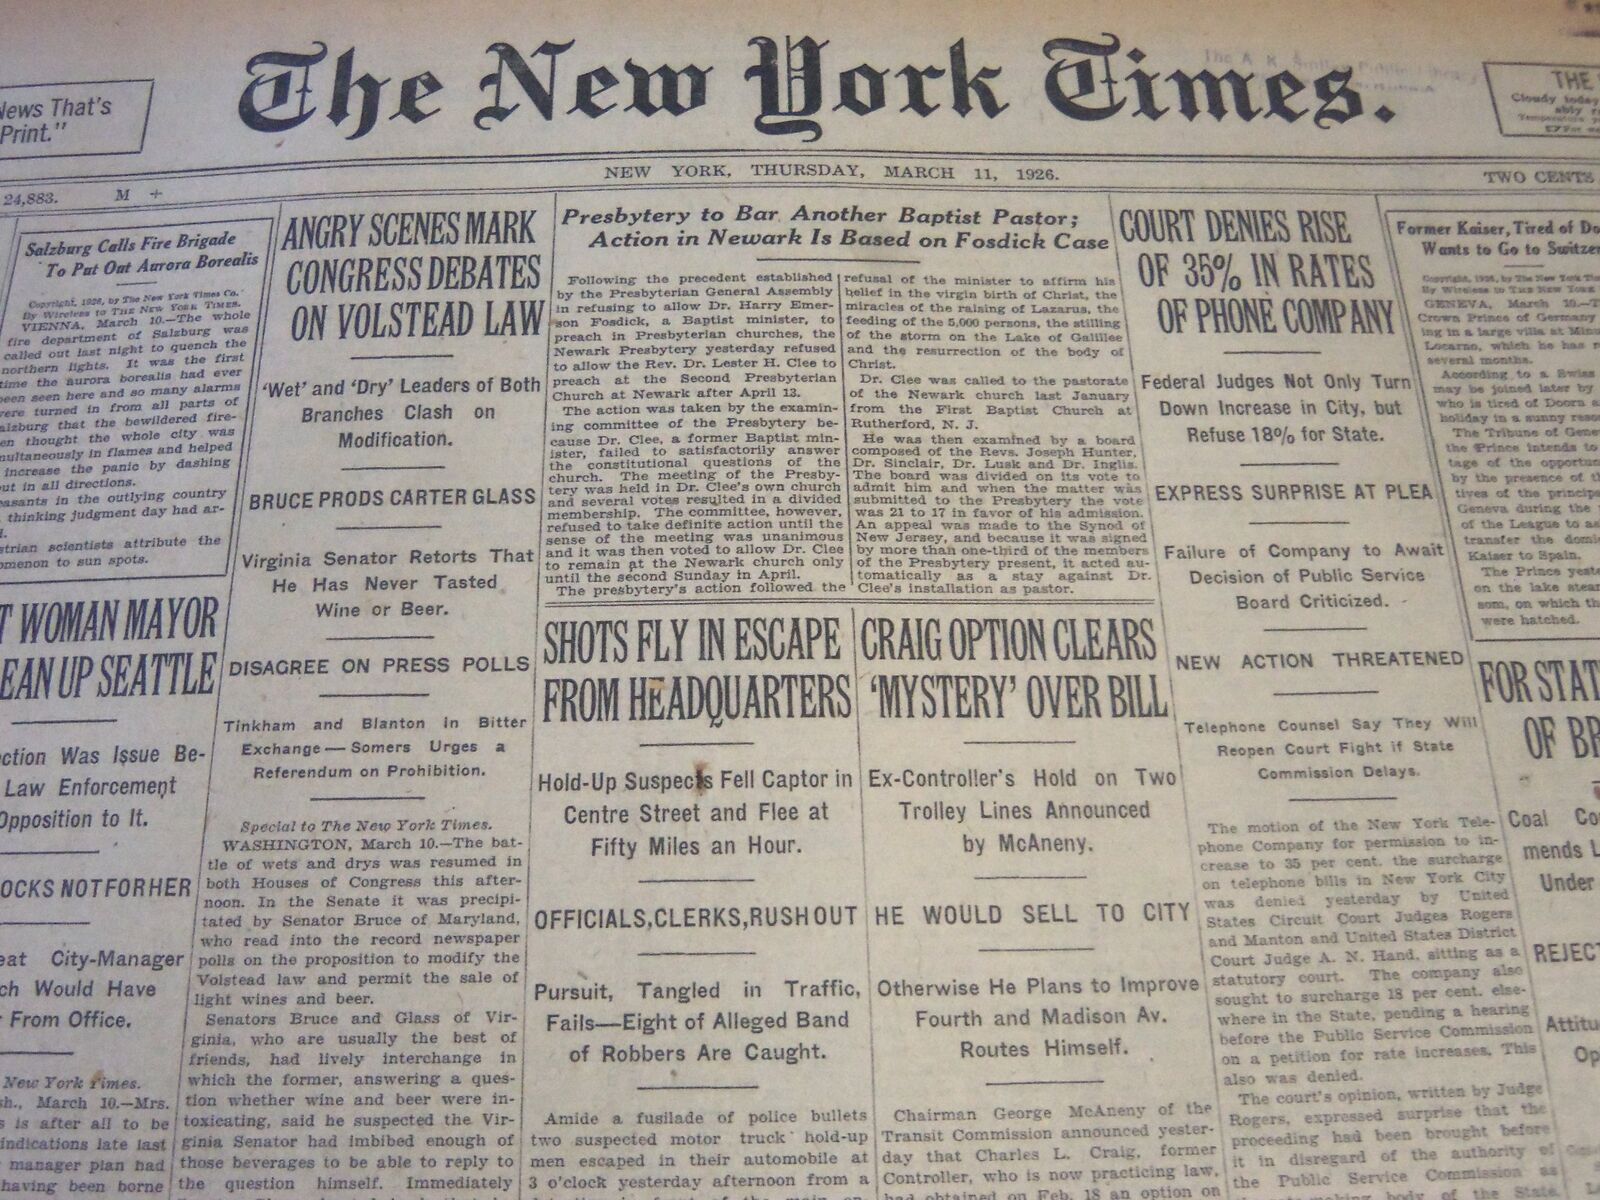 1926 MARCH 11 NEW YORK TIMES - SHOTS FLY IN ESCAPE FROM HEADQUARTERS - NT 6534